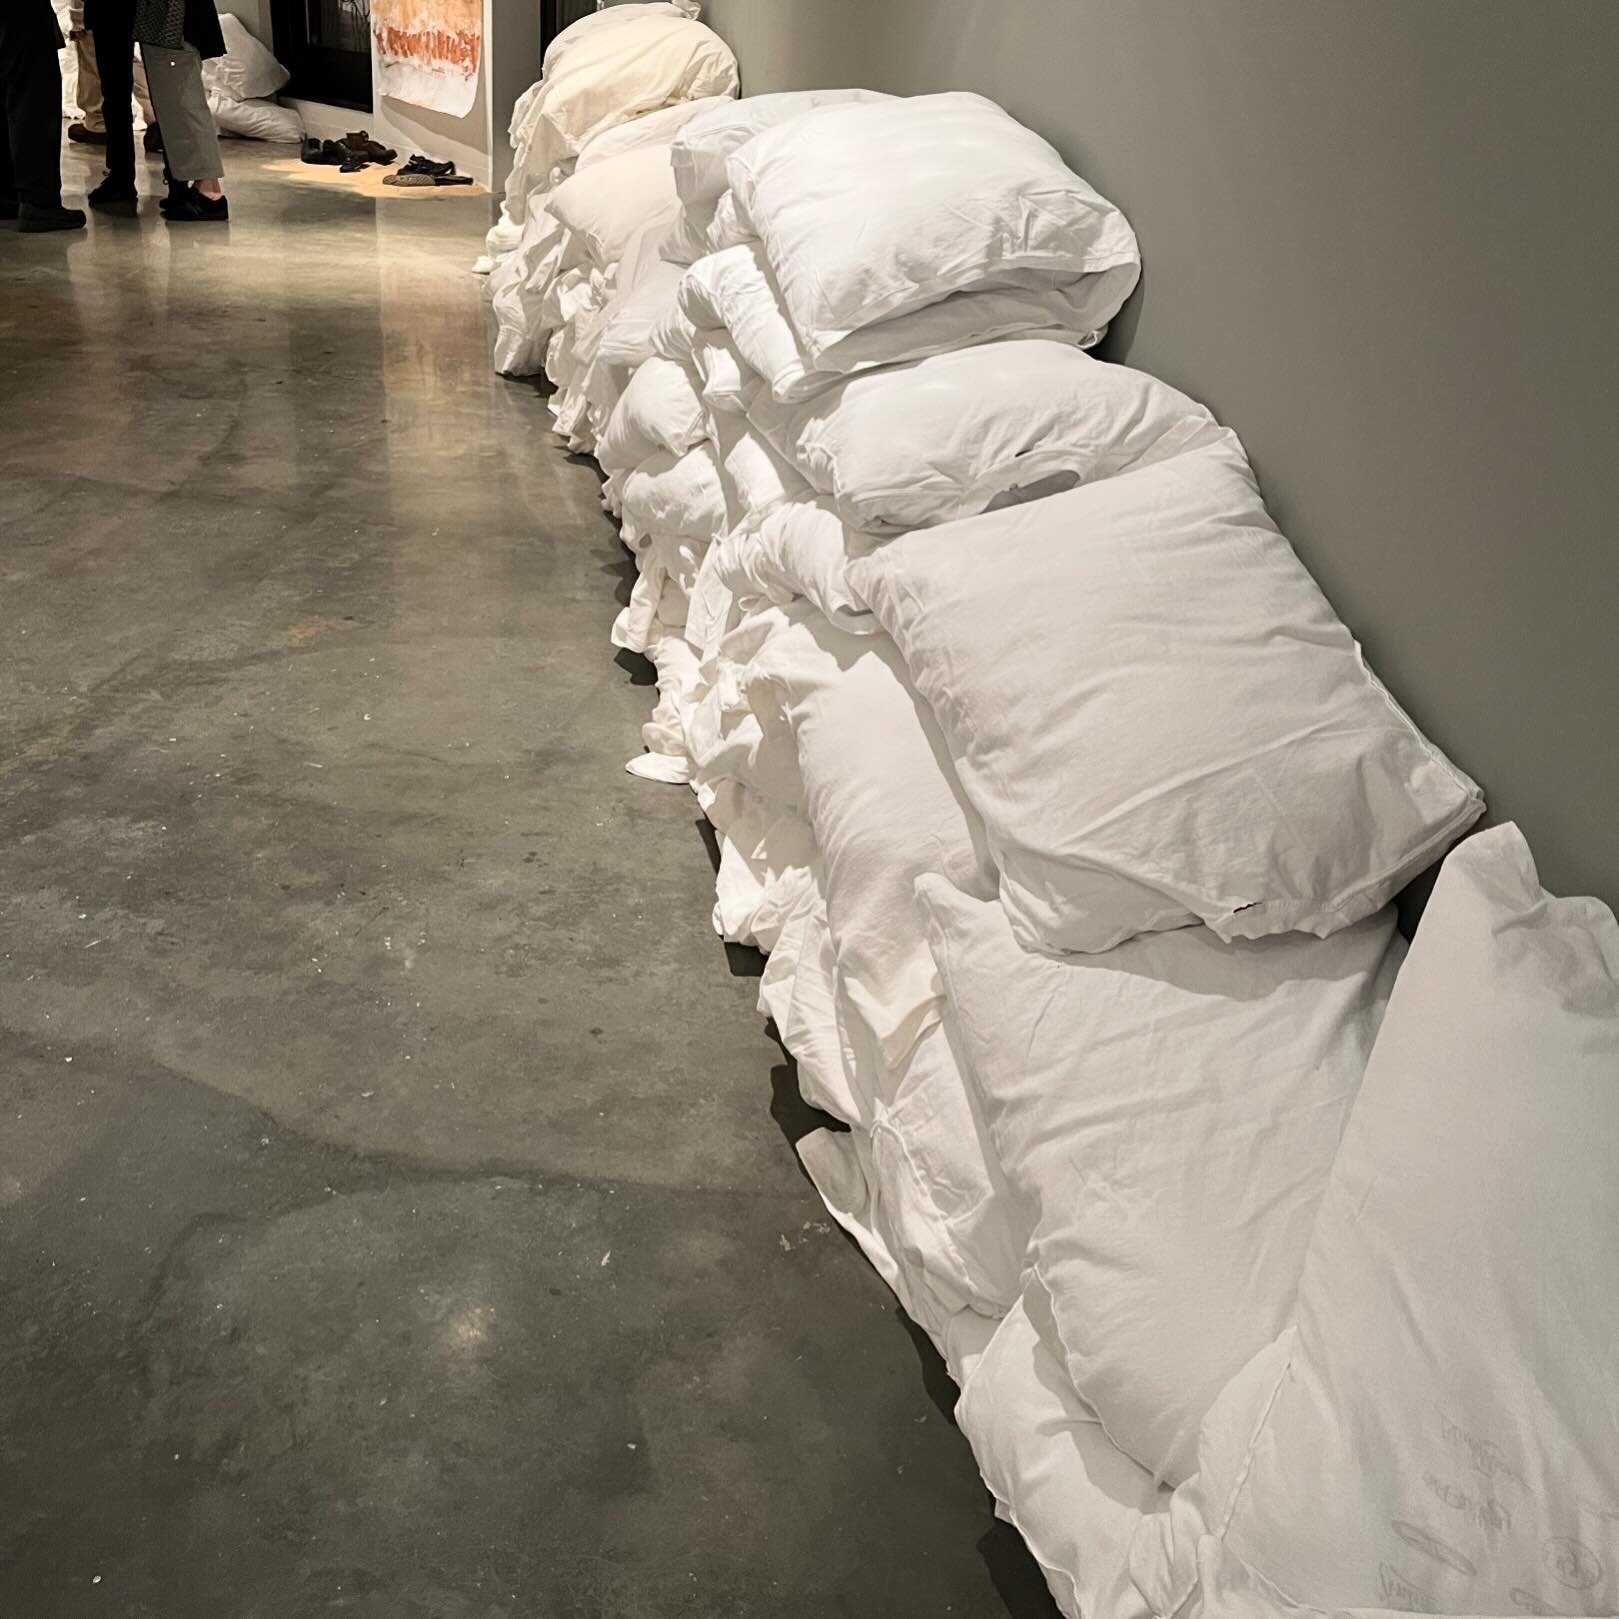 &ldquo;Deluge/Sions,&rdquo; 2024, Ellyn Weiss and Sondra N. Arkin, t-shirts &amp; pillows, size variable

Disembodied torsos represent the rising tide of those uprooted by environmental disasters and forced to seek precarious refuge in unfamiliar la